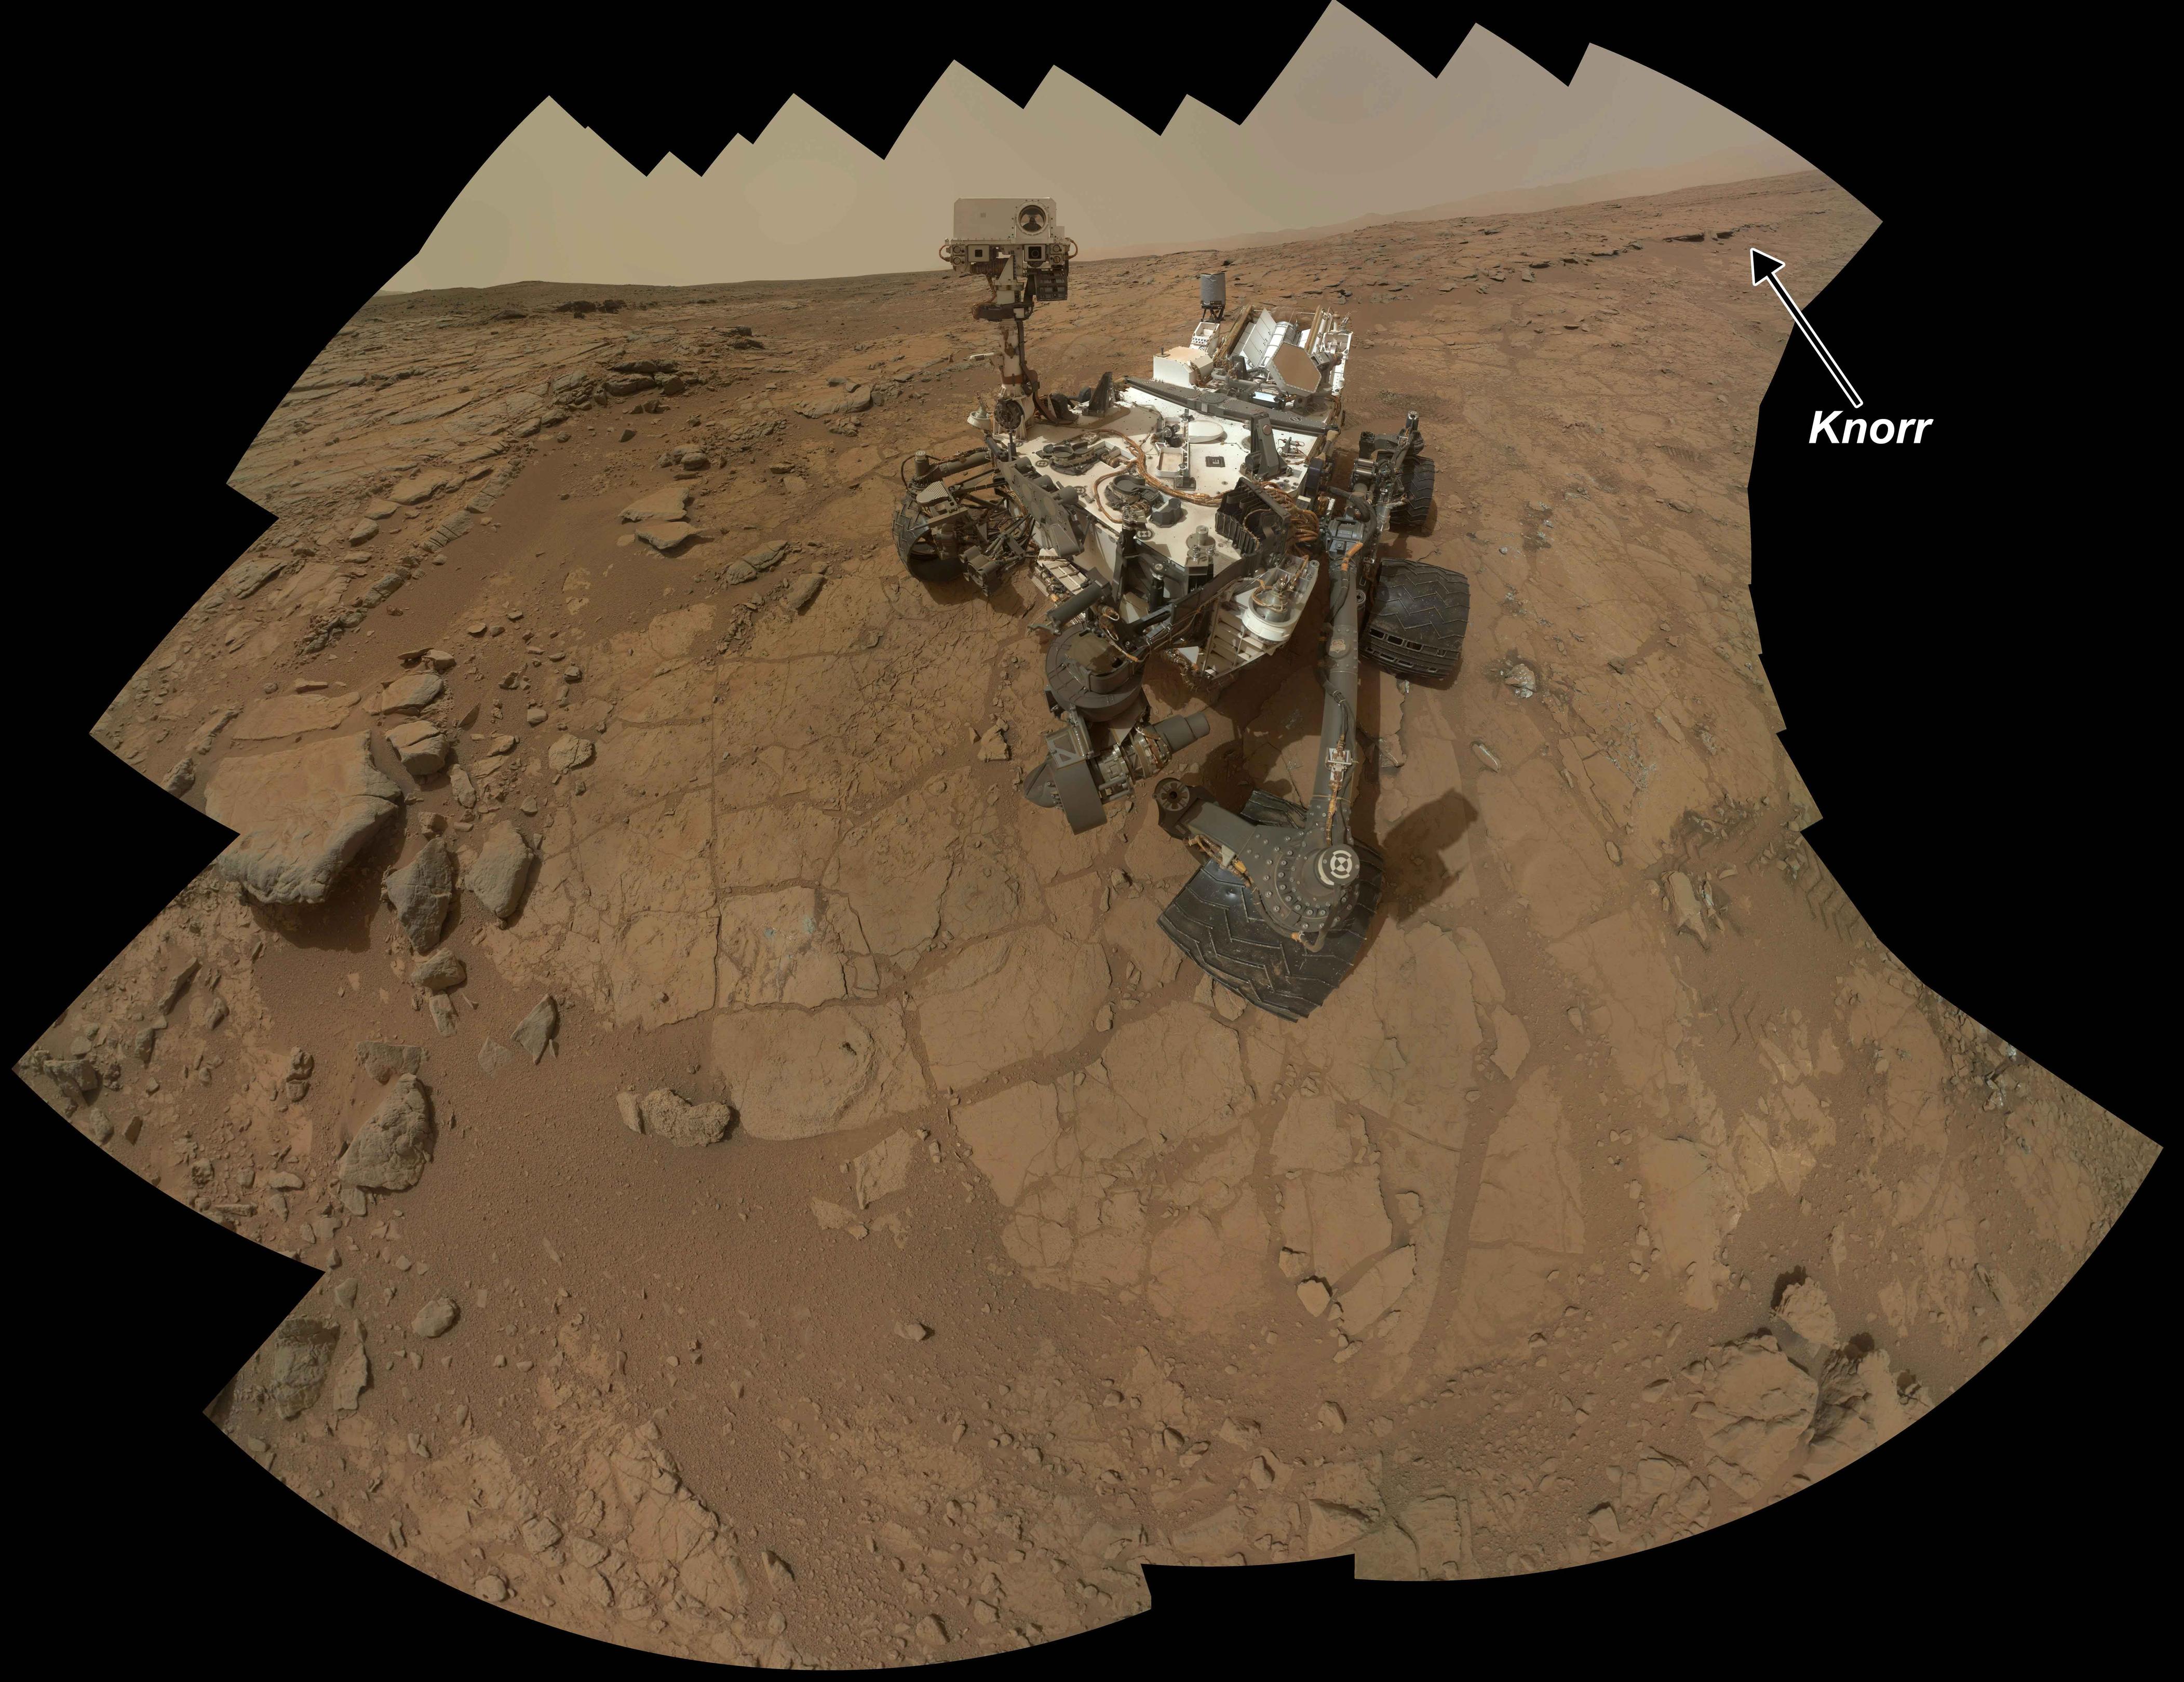 The location of a rock target called "Knorr" is indicated on this self-portrait of the Curiosity rover in the "Yellowknife Bay" area.